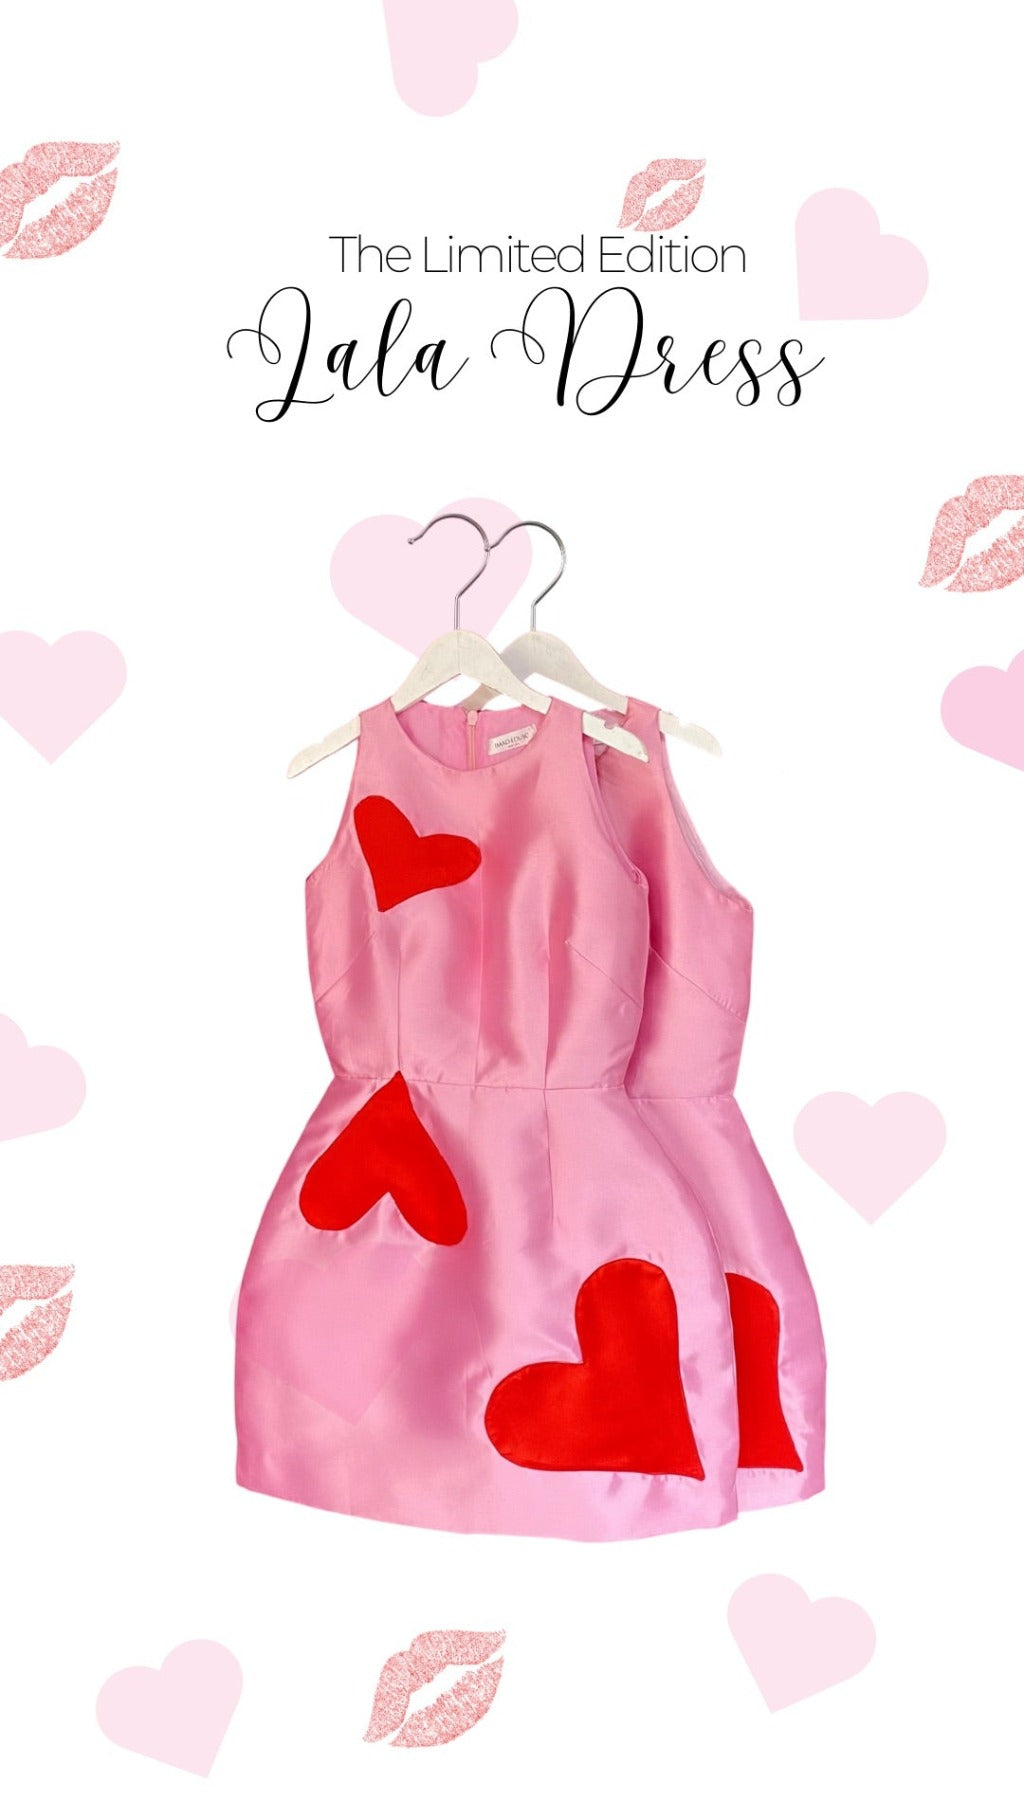 Pink dress with red hearts on it